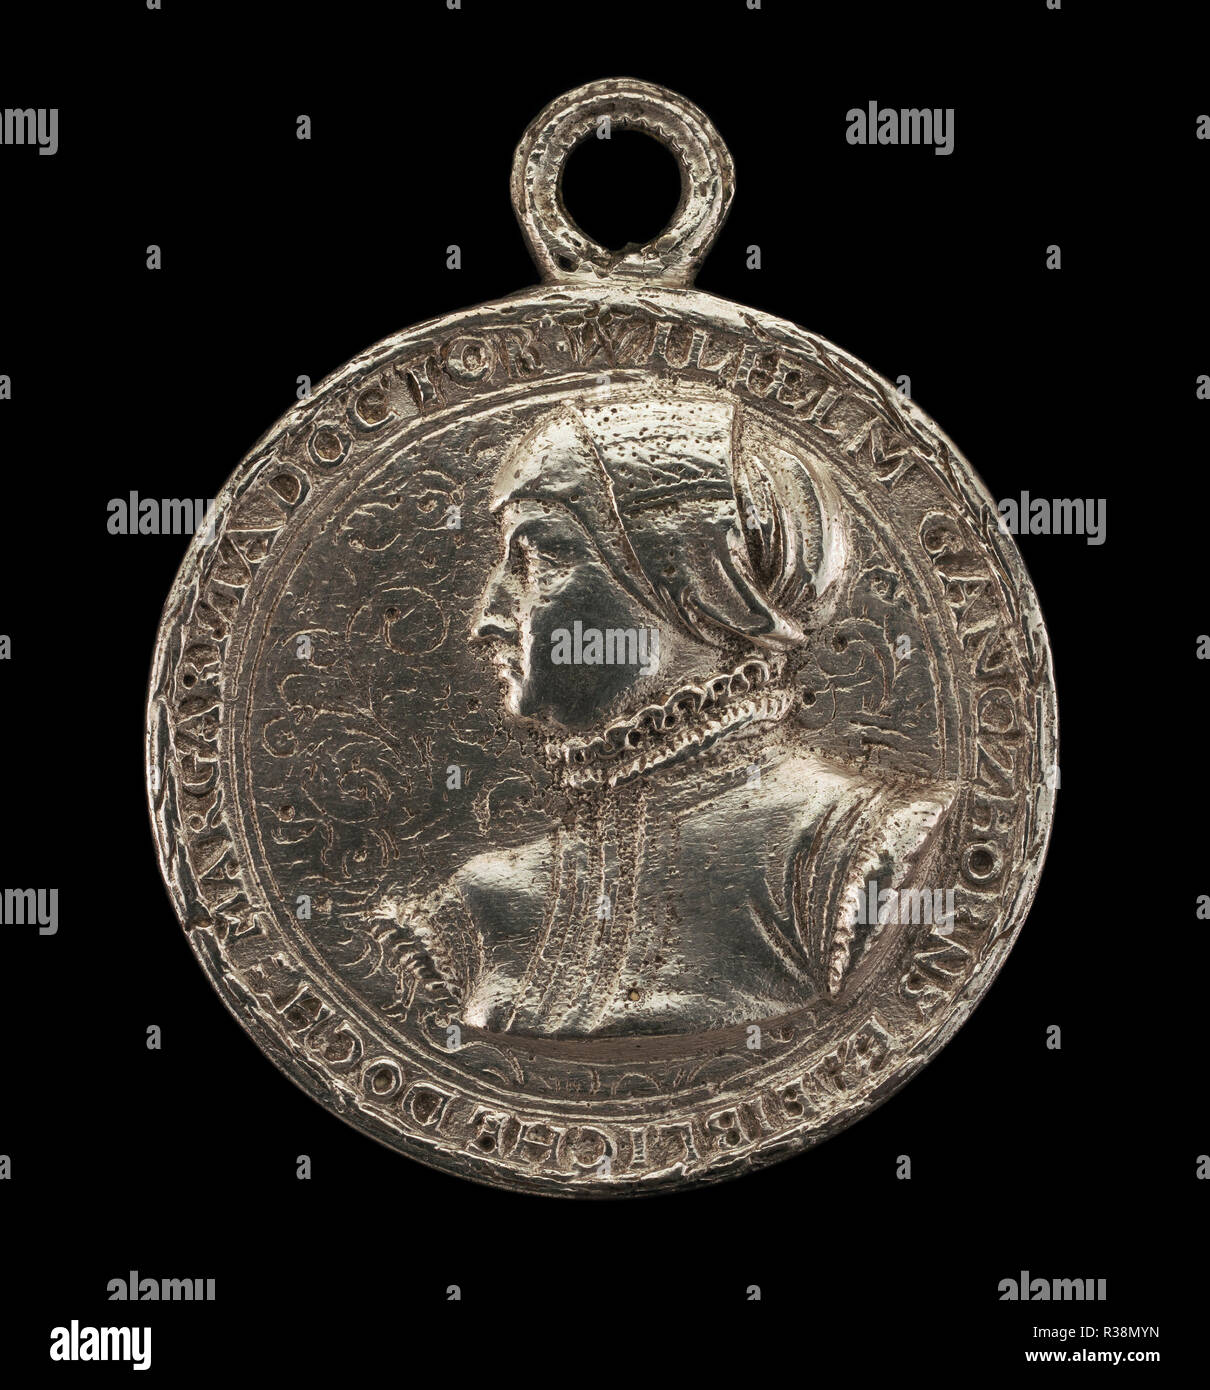 Margarethe Ganzhorn Balbus, Wife of Johann Balbus [obverse]. Dated: 1565. Dimensions: overall (height with suspension loop): 4.75 cm (1 7/8 in.)  overall (diameter without loop): 3.94 cm (1 9/16 in.)  gross weight: 31.15 gr (0.069 lb.)  axis: 12:00. Medium: silver//With ring. Museum: National Gallery of Art, Washington DC. Author: Joachim Deschler. Stock Photo